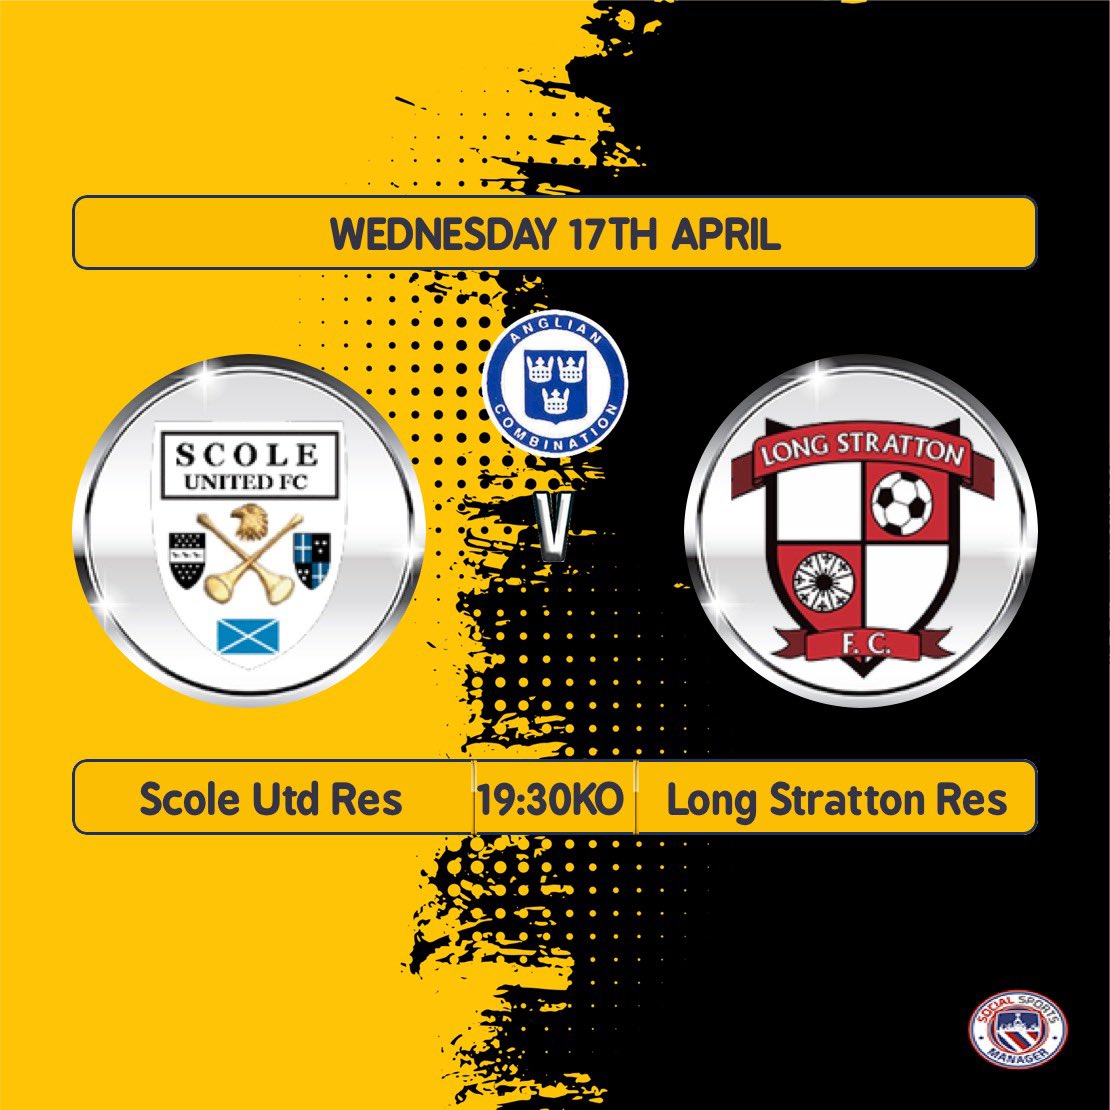 Tonight the ressies face @longstrattonfc reserves in a 6:30 KO, who have been in very good form of late! The boys still fighting for survival will be hoping to cause an upset and take the 3 points! Big game and any support is appreciated, bar will be open 🍻💛🖤 #UTS